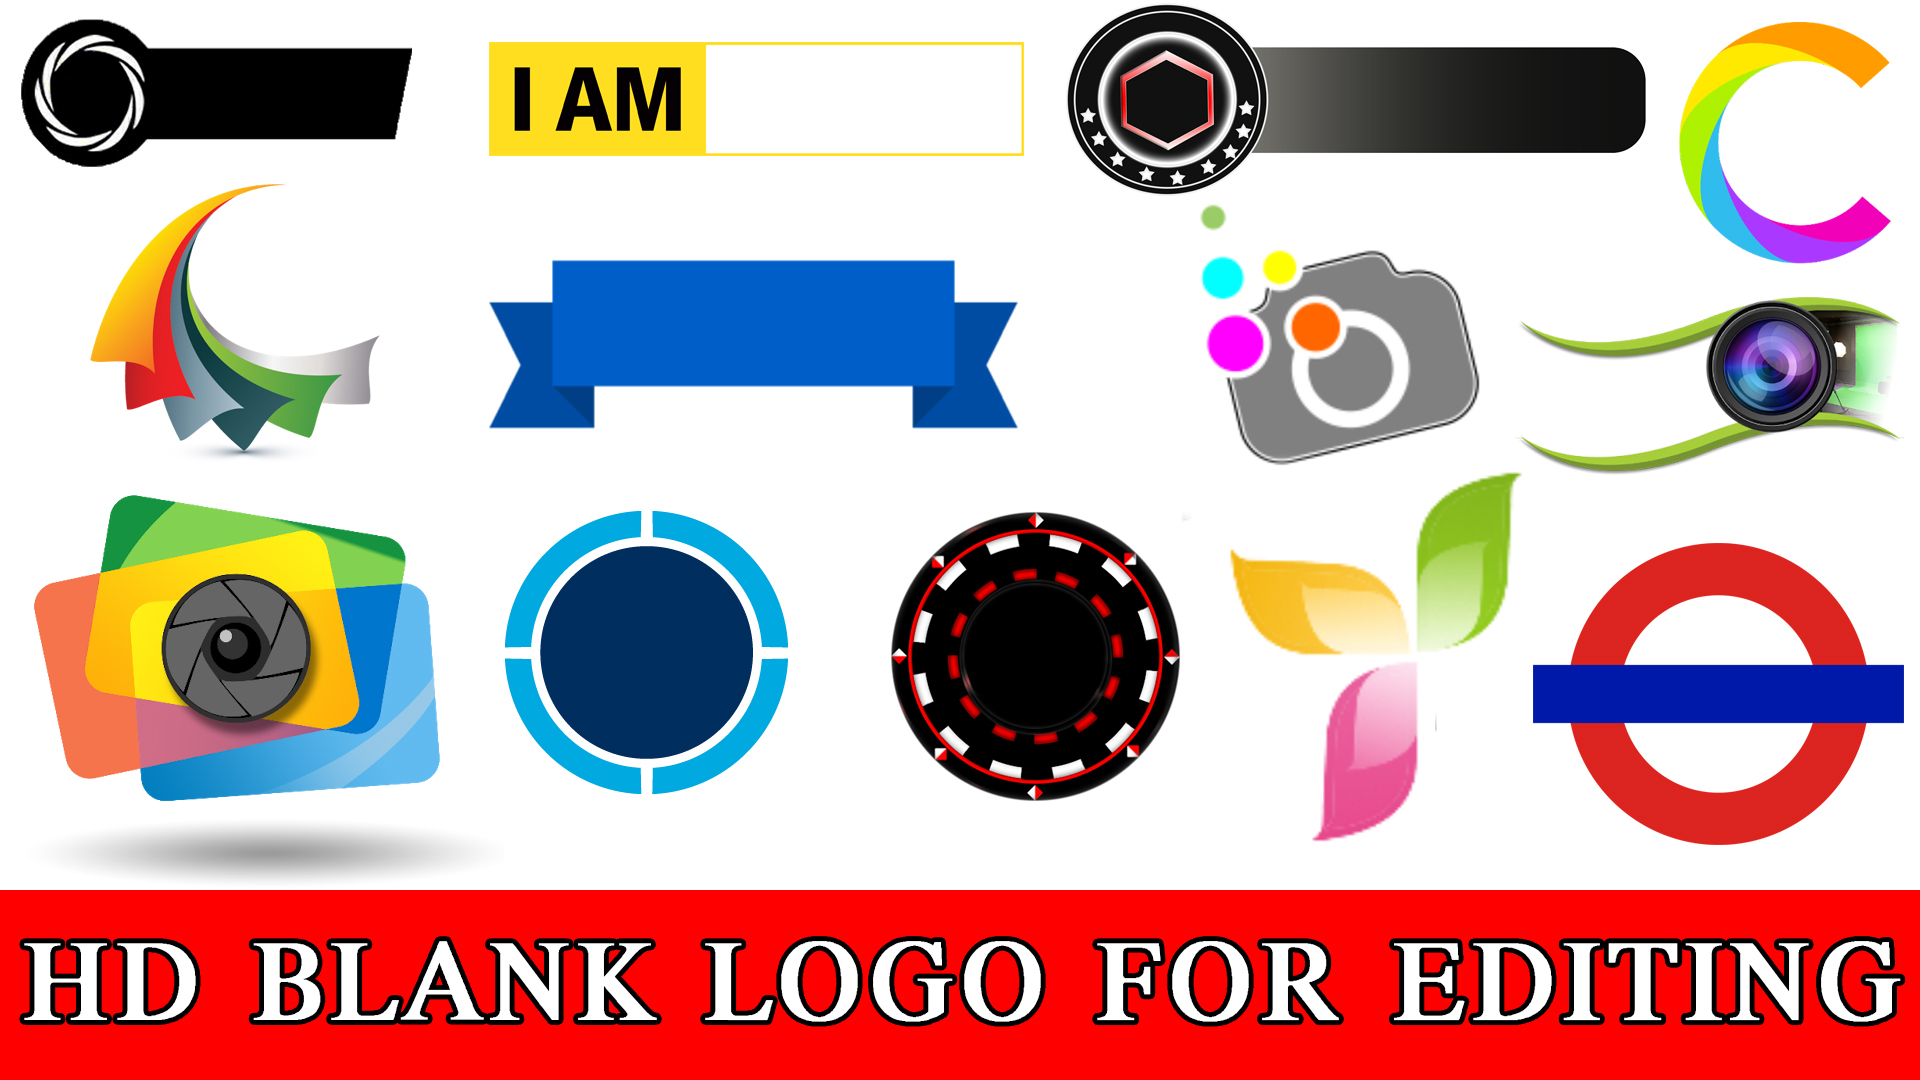 Hd Blank Logo Png For Picsart And Photoshop Editing Latest